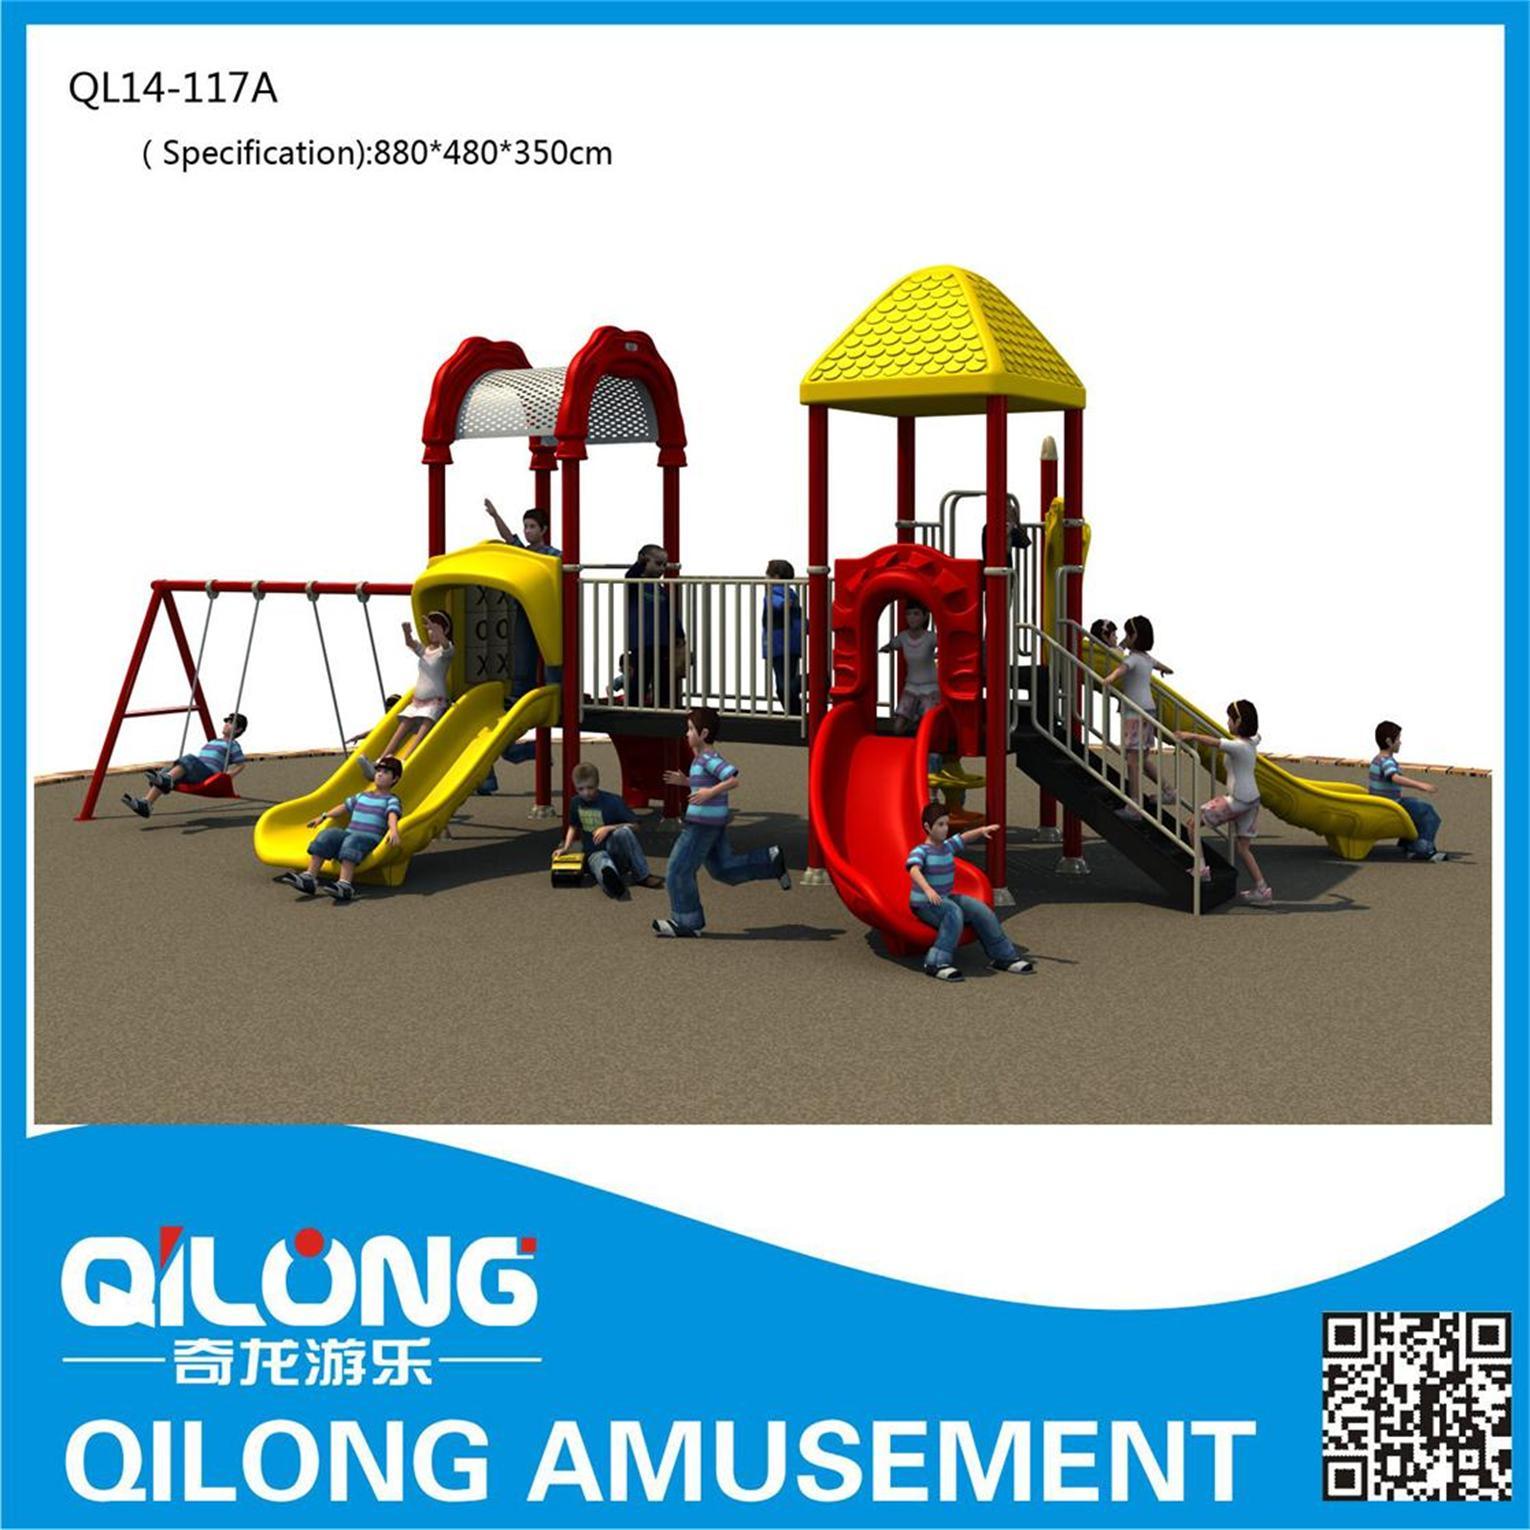 Competitive Outdoor Playground Sets (QL14-117A)